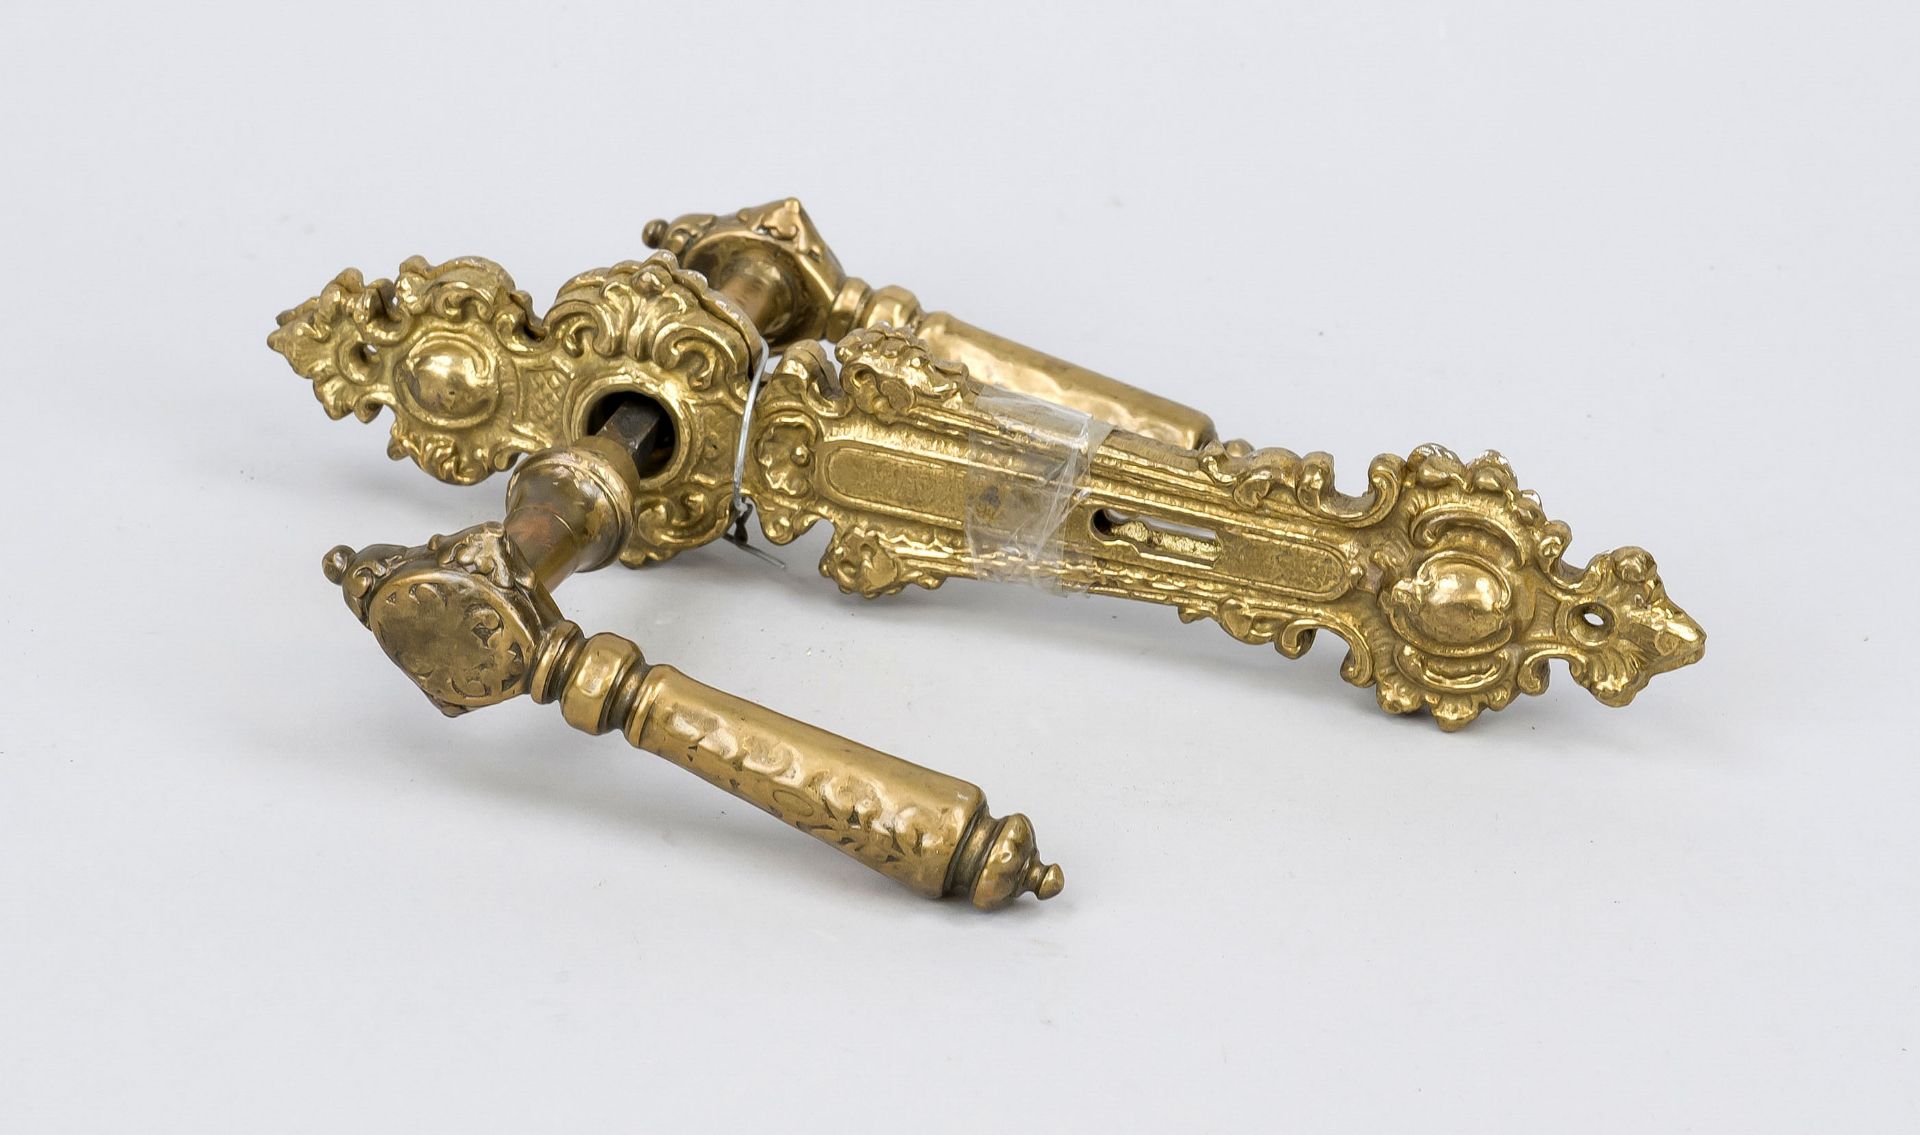 Wilhelminian style lever handle set, 2nd half 19th century, brass. Fitting curved and ornamented